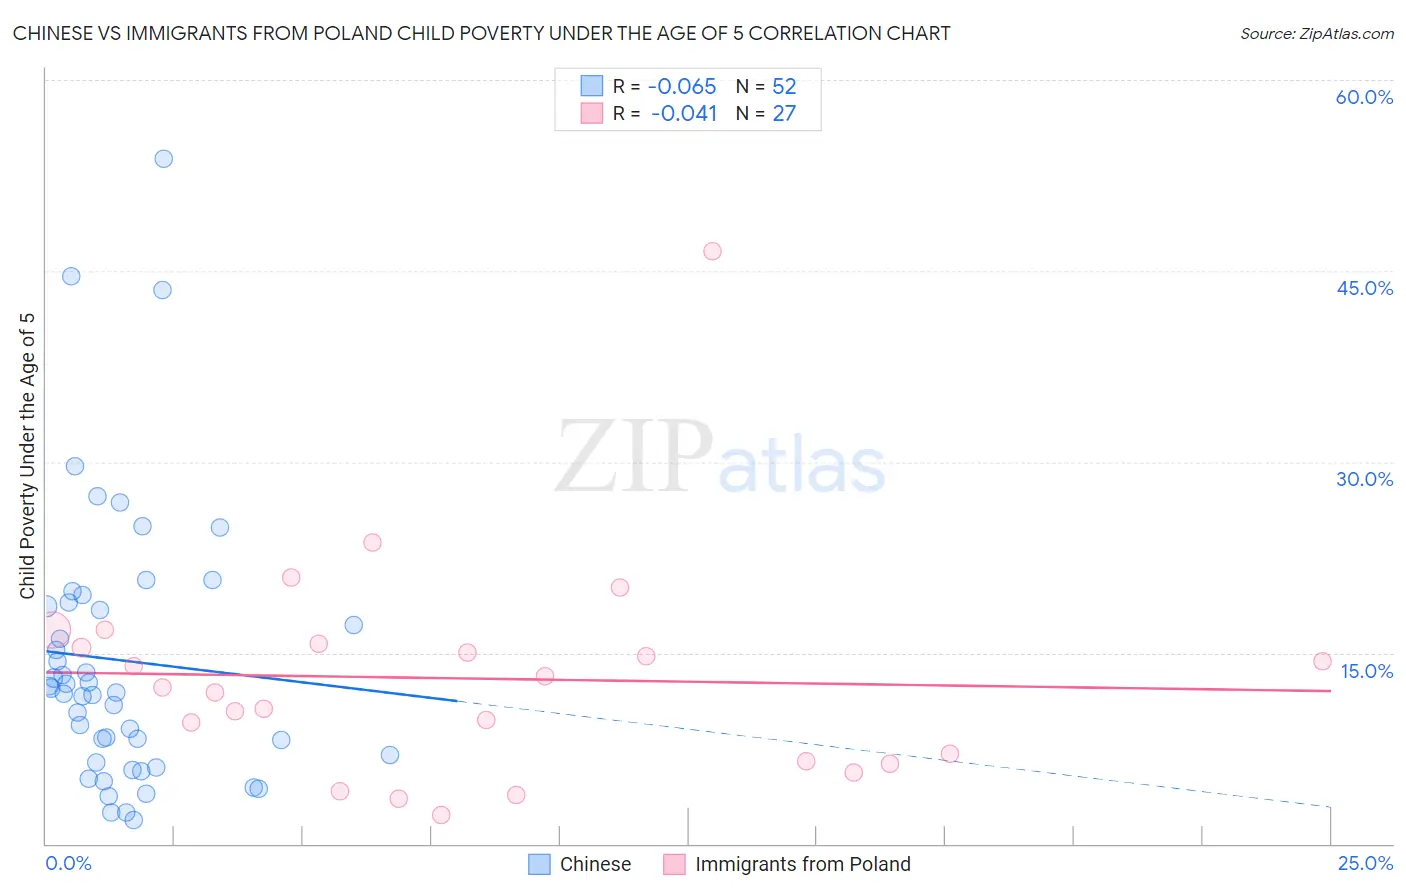 Chinese vs Immigrants from Poland Child Poverty Under the Age of 5